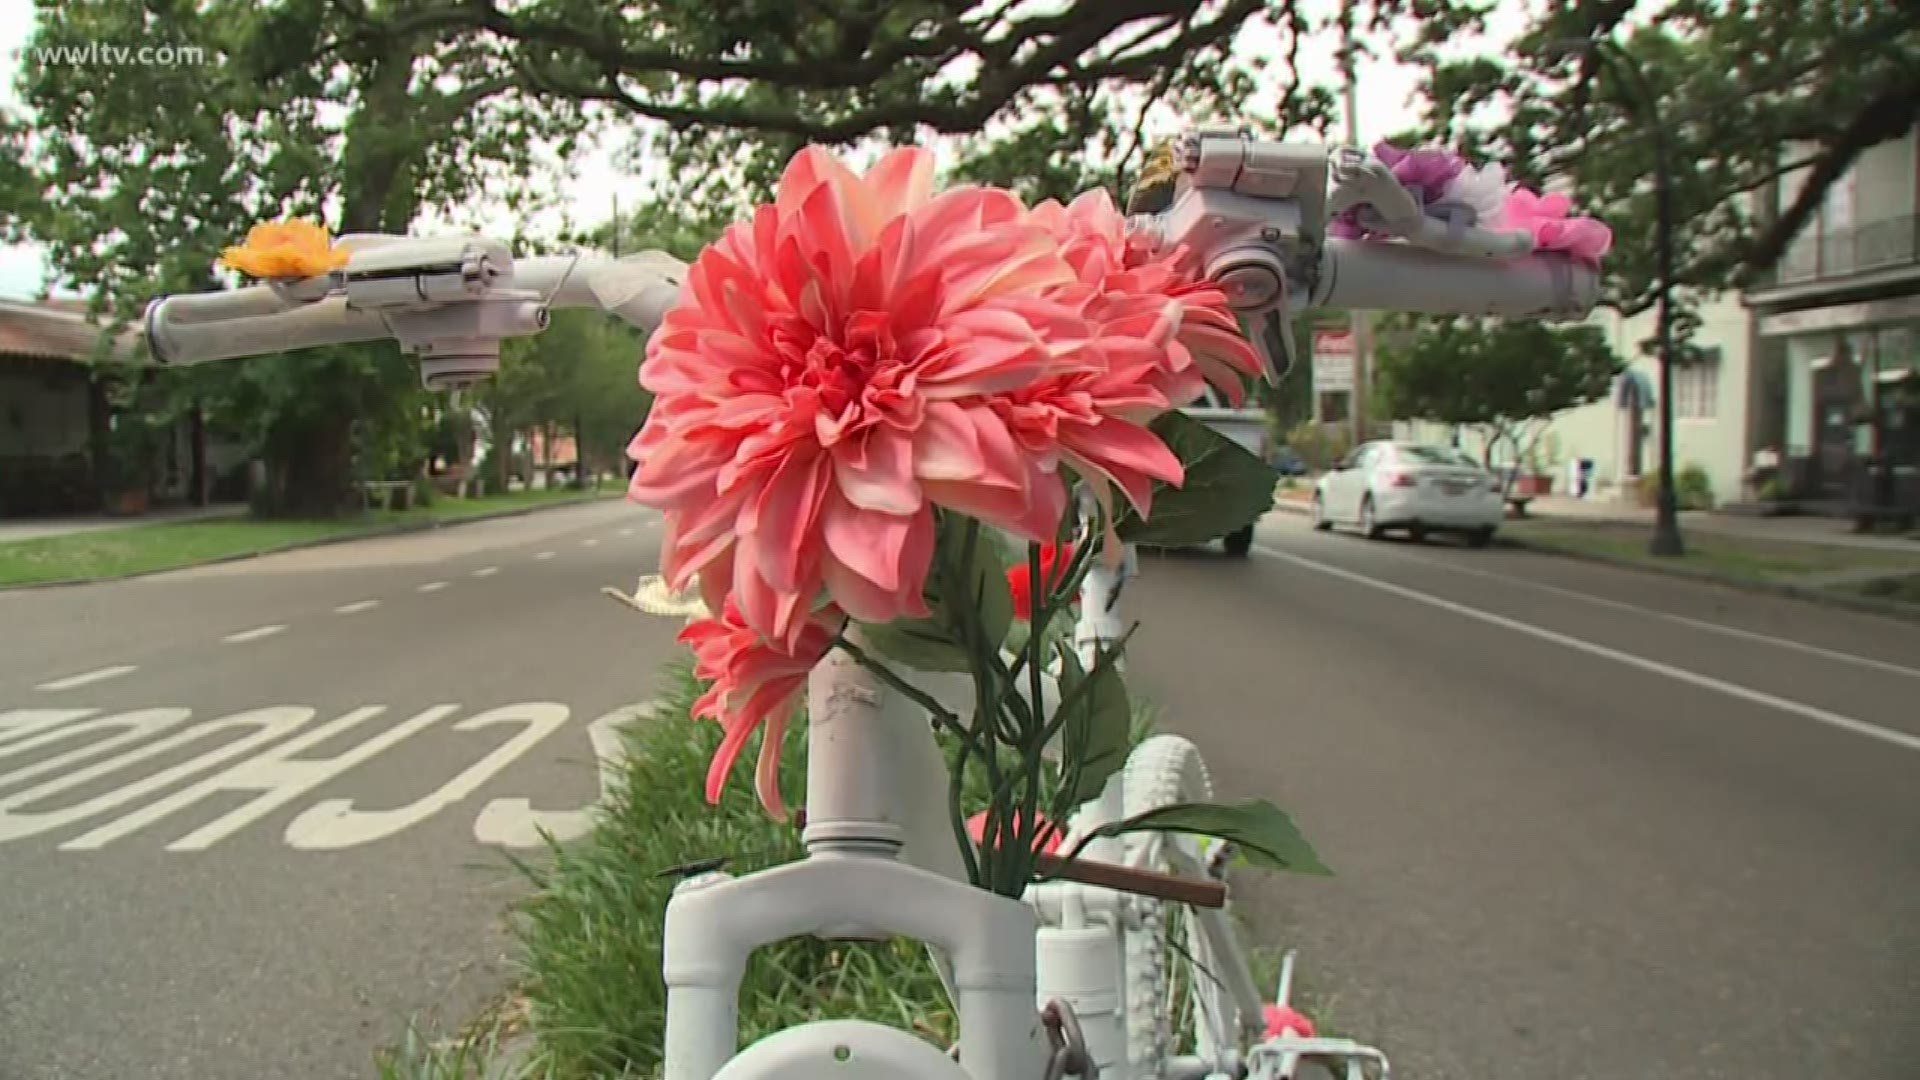 A new memorial has been created along Esplanade Avenue with the help of the community. Now, those behind it are encouraging people to come see if for themselves.